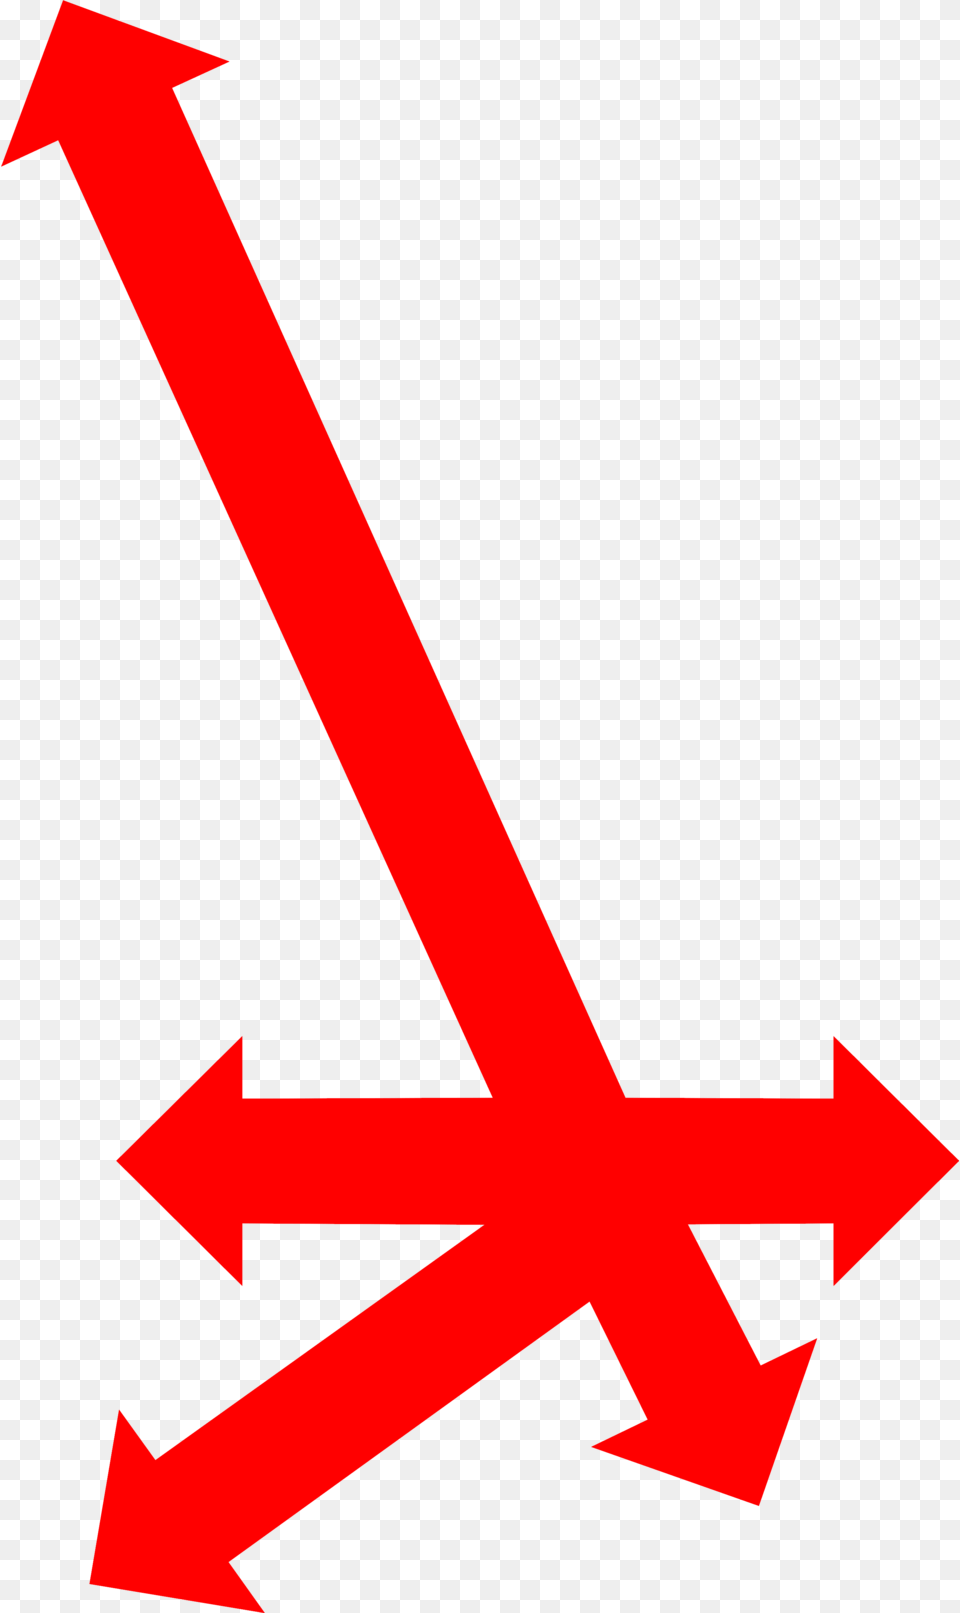 Arrows Red Stock Photo Illustration Of A Multi, Symbol, Electronics, Hardware, Dynamite Free Transparent Png